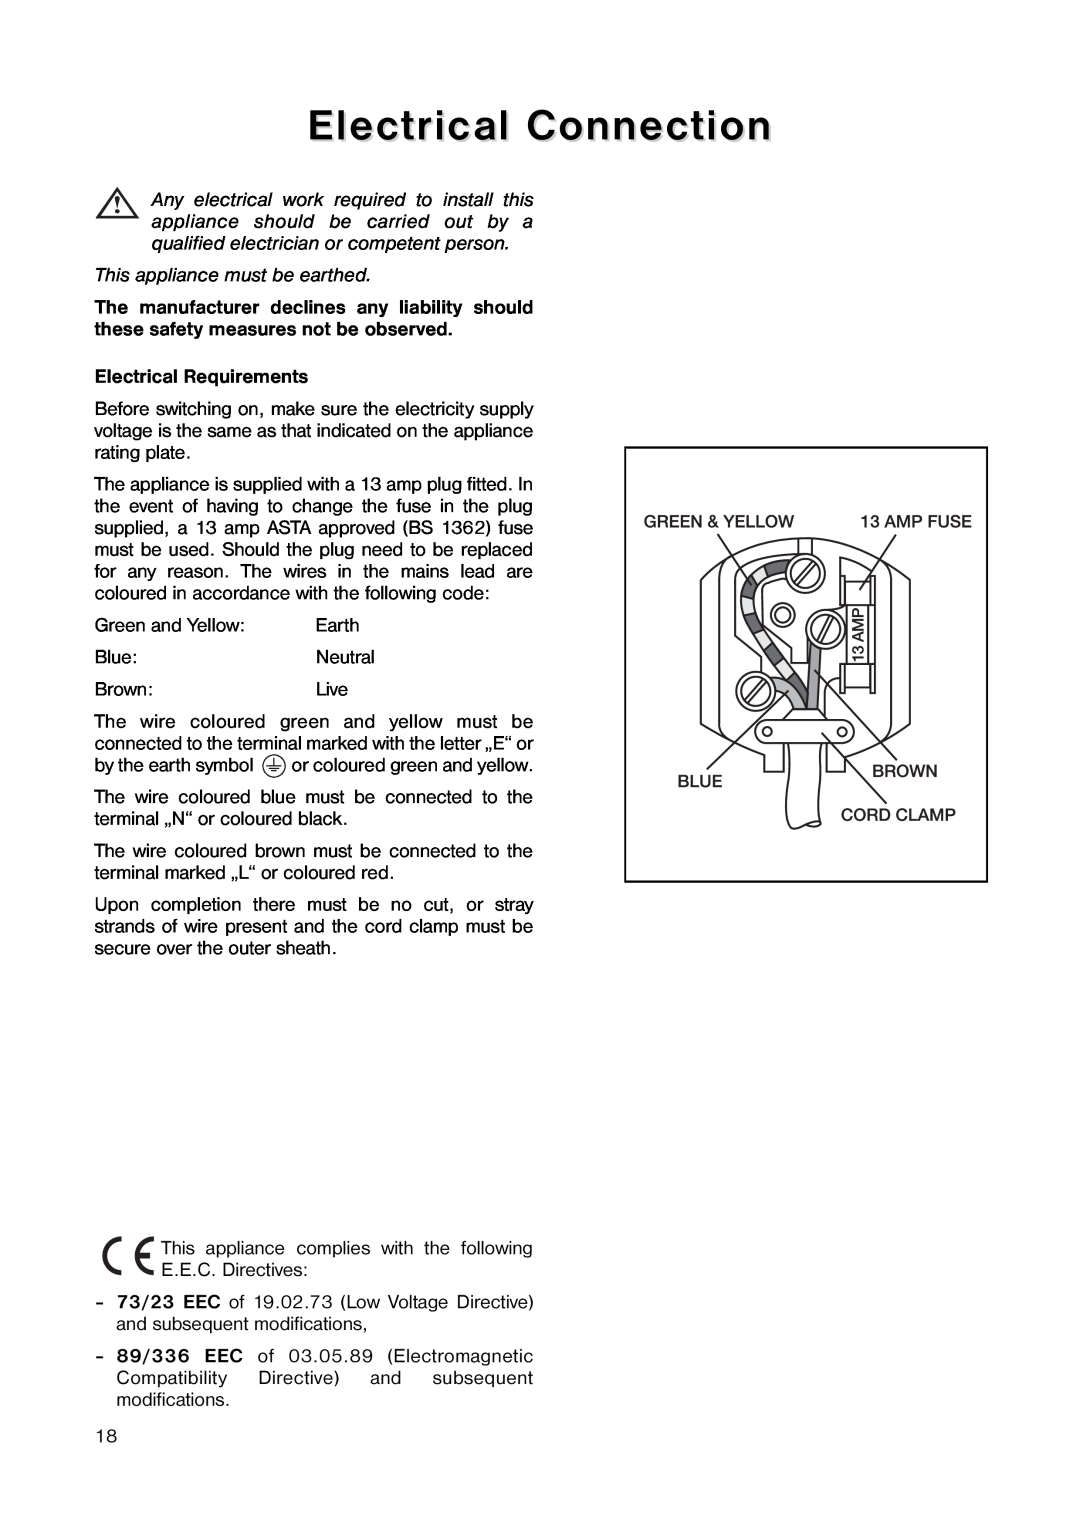 Tricity Bendix TB 117 FF installation instructions Electrical Connection, Electrical Requirements 